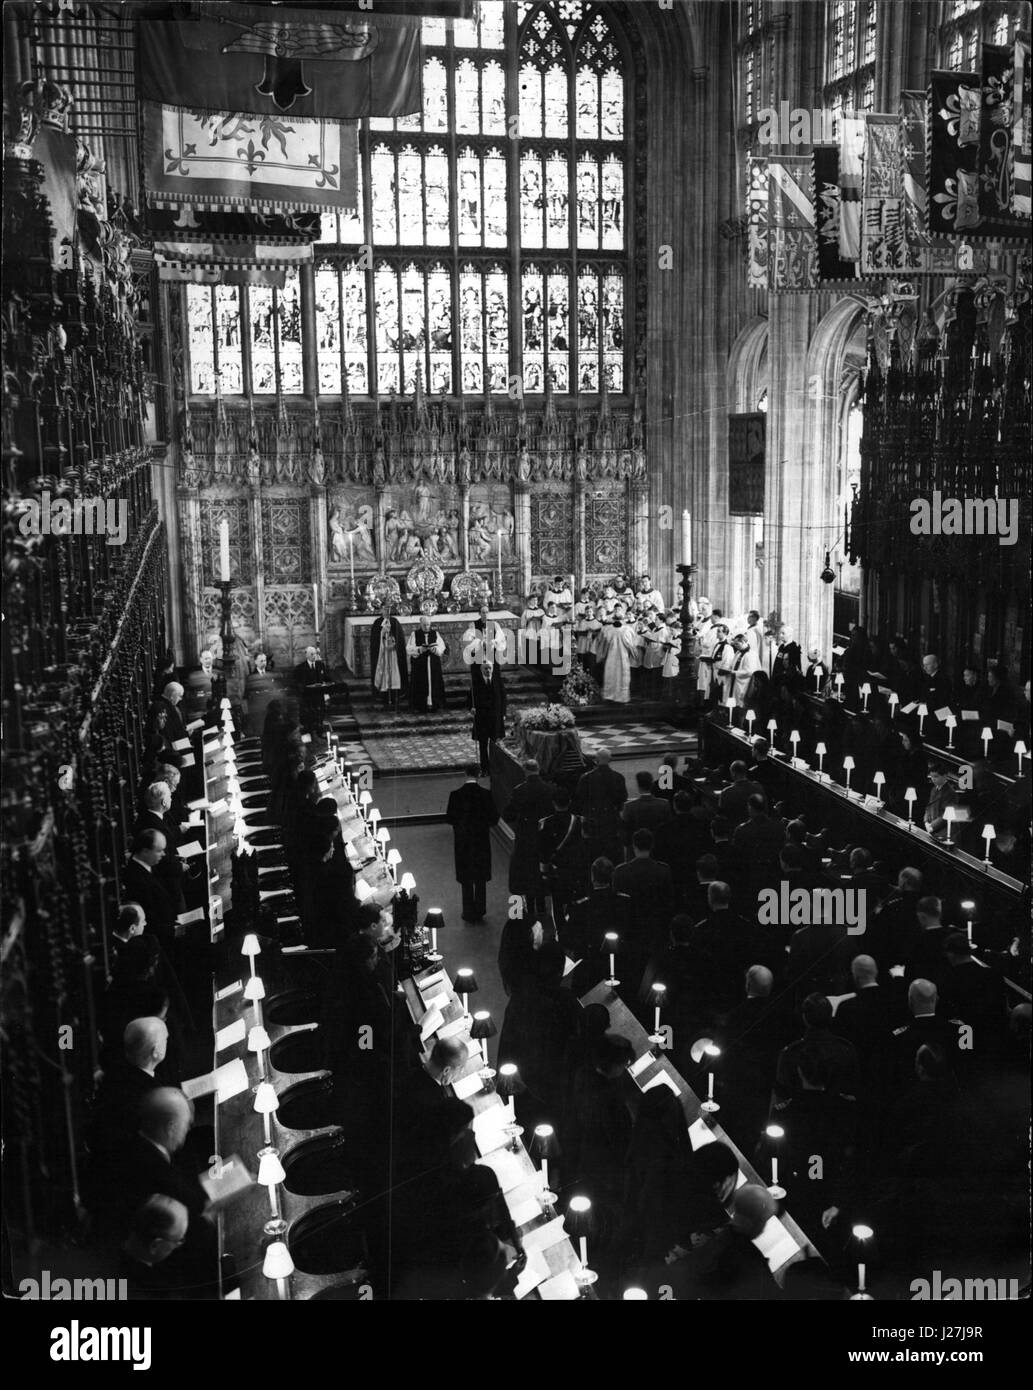 Mar. 03, 1953 - Queen Mary: The Final Scene: The scene, sombre and impressive, at the funeral service of Queen Mary in St. George's Chapel, Windsor today (Tuesday). Been in paw on right of picture are (left to right), The Queen Elizabeth the Queen mother and Princess Margaret. Standing before the coffin are (left to right) The Duke of Kent; The Duke of Golucerster; The Earl of Athlone, Queen Mary's brothers; and theDuke of Windsor. Before the alter the Archbishop of Canterbury, Dr. Goeffrey Fischer (center). is seen conducting the service. (Credit Image: © Keystone Press Agency/Keystone USA vi Stock Photo